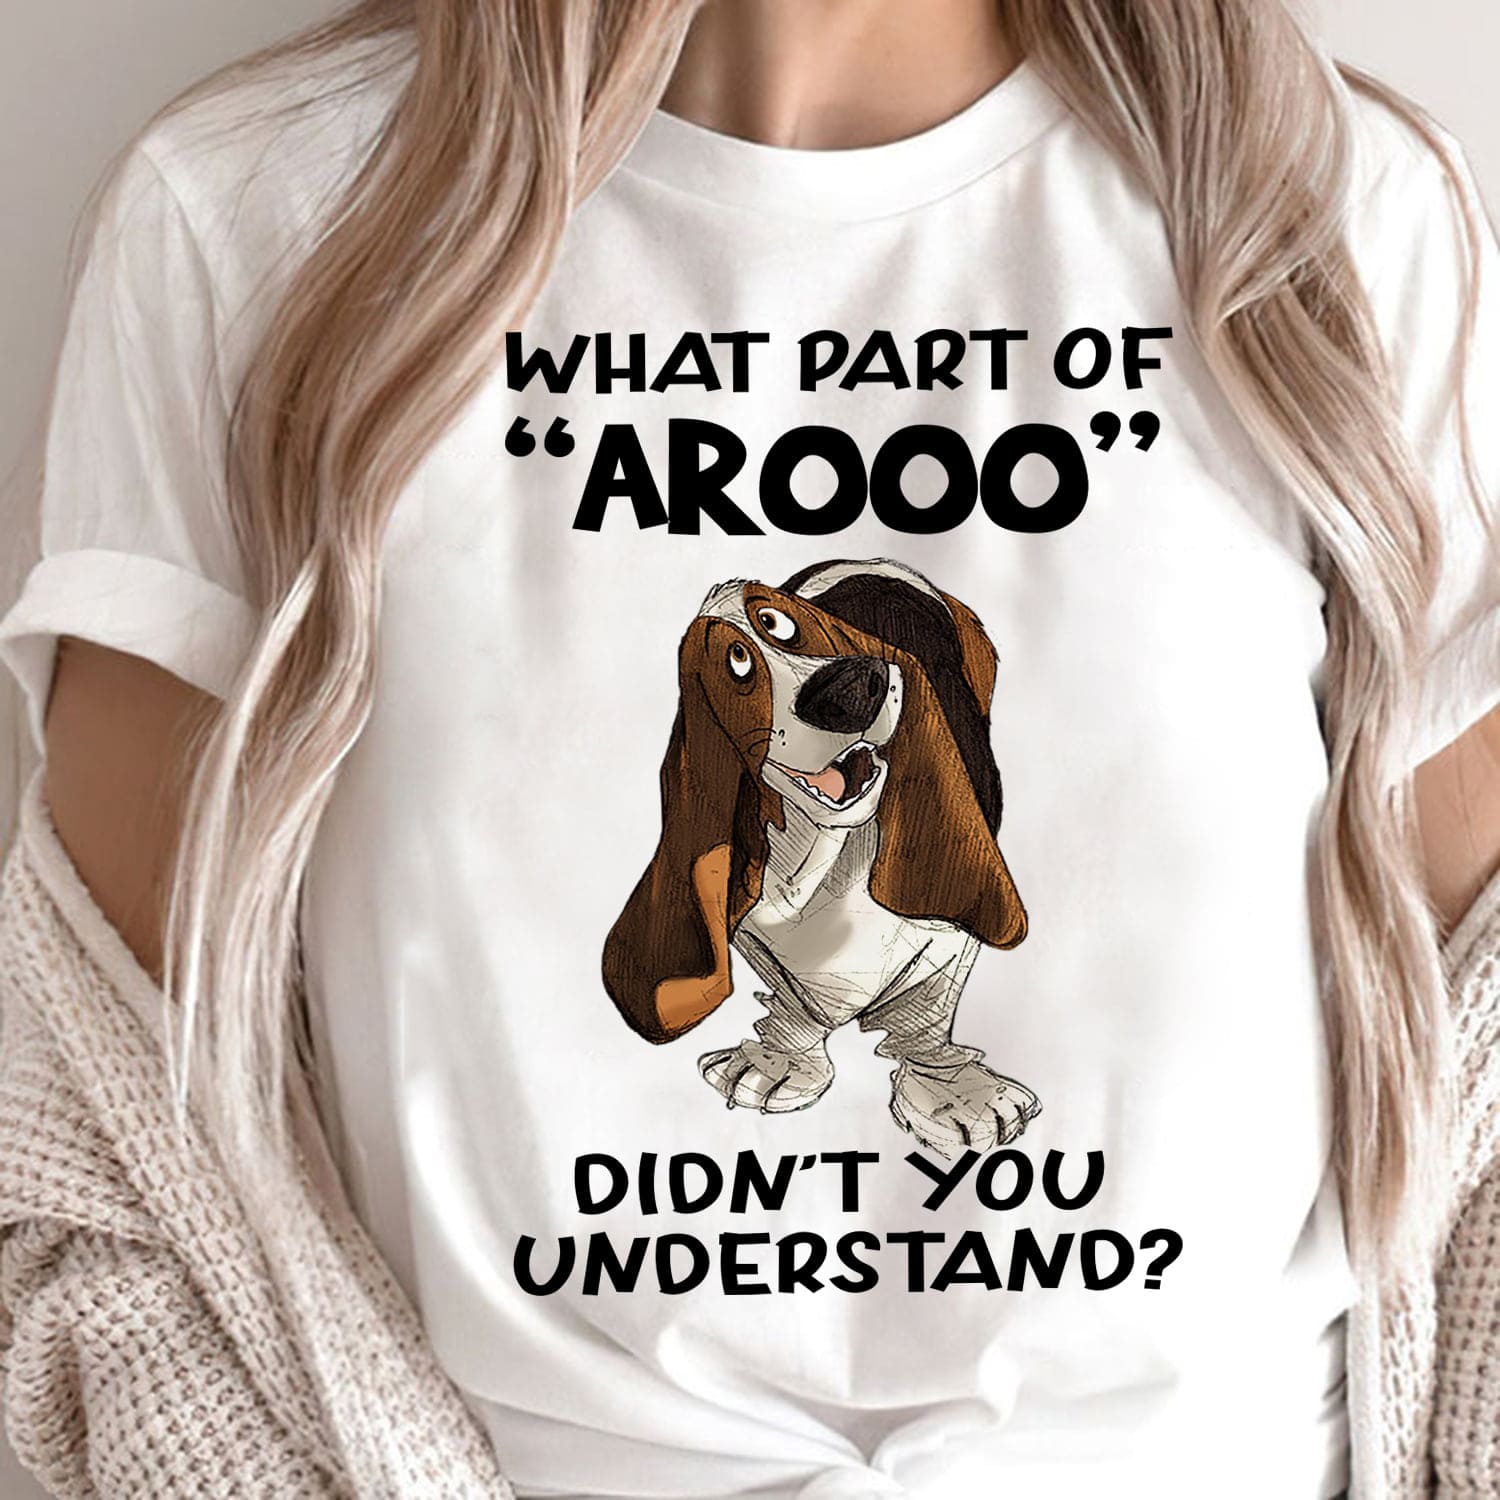 Cute Dog Graphic t-shirt - what part of arooo didn't you understand?